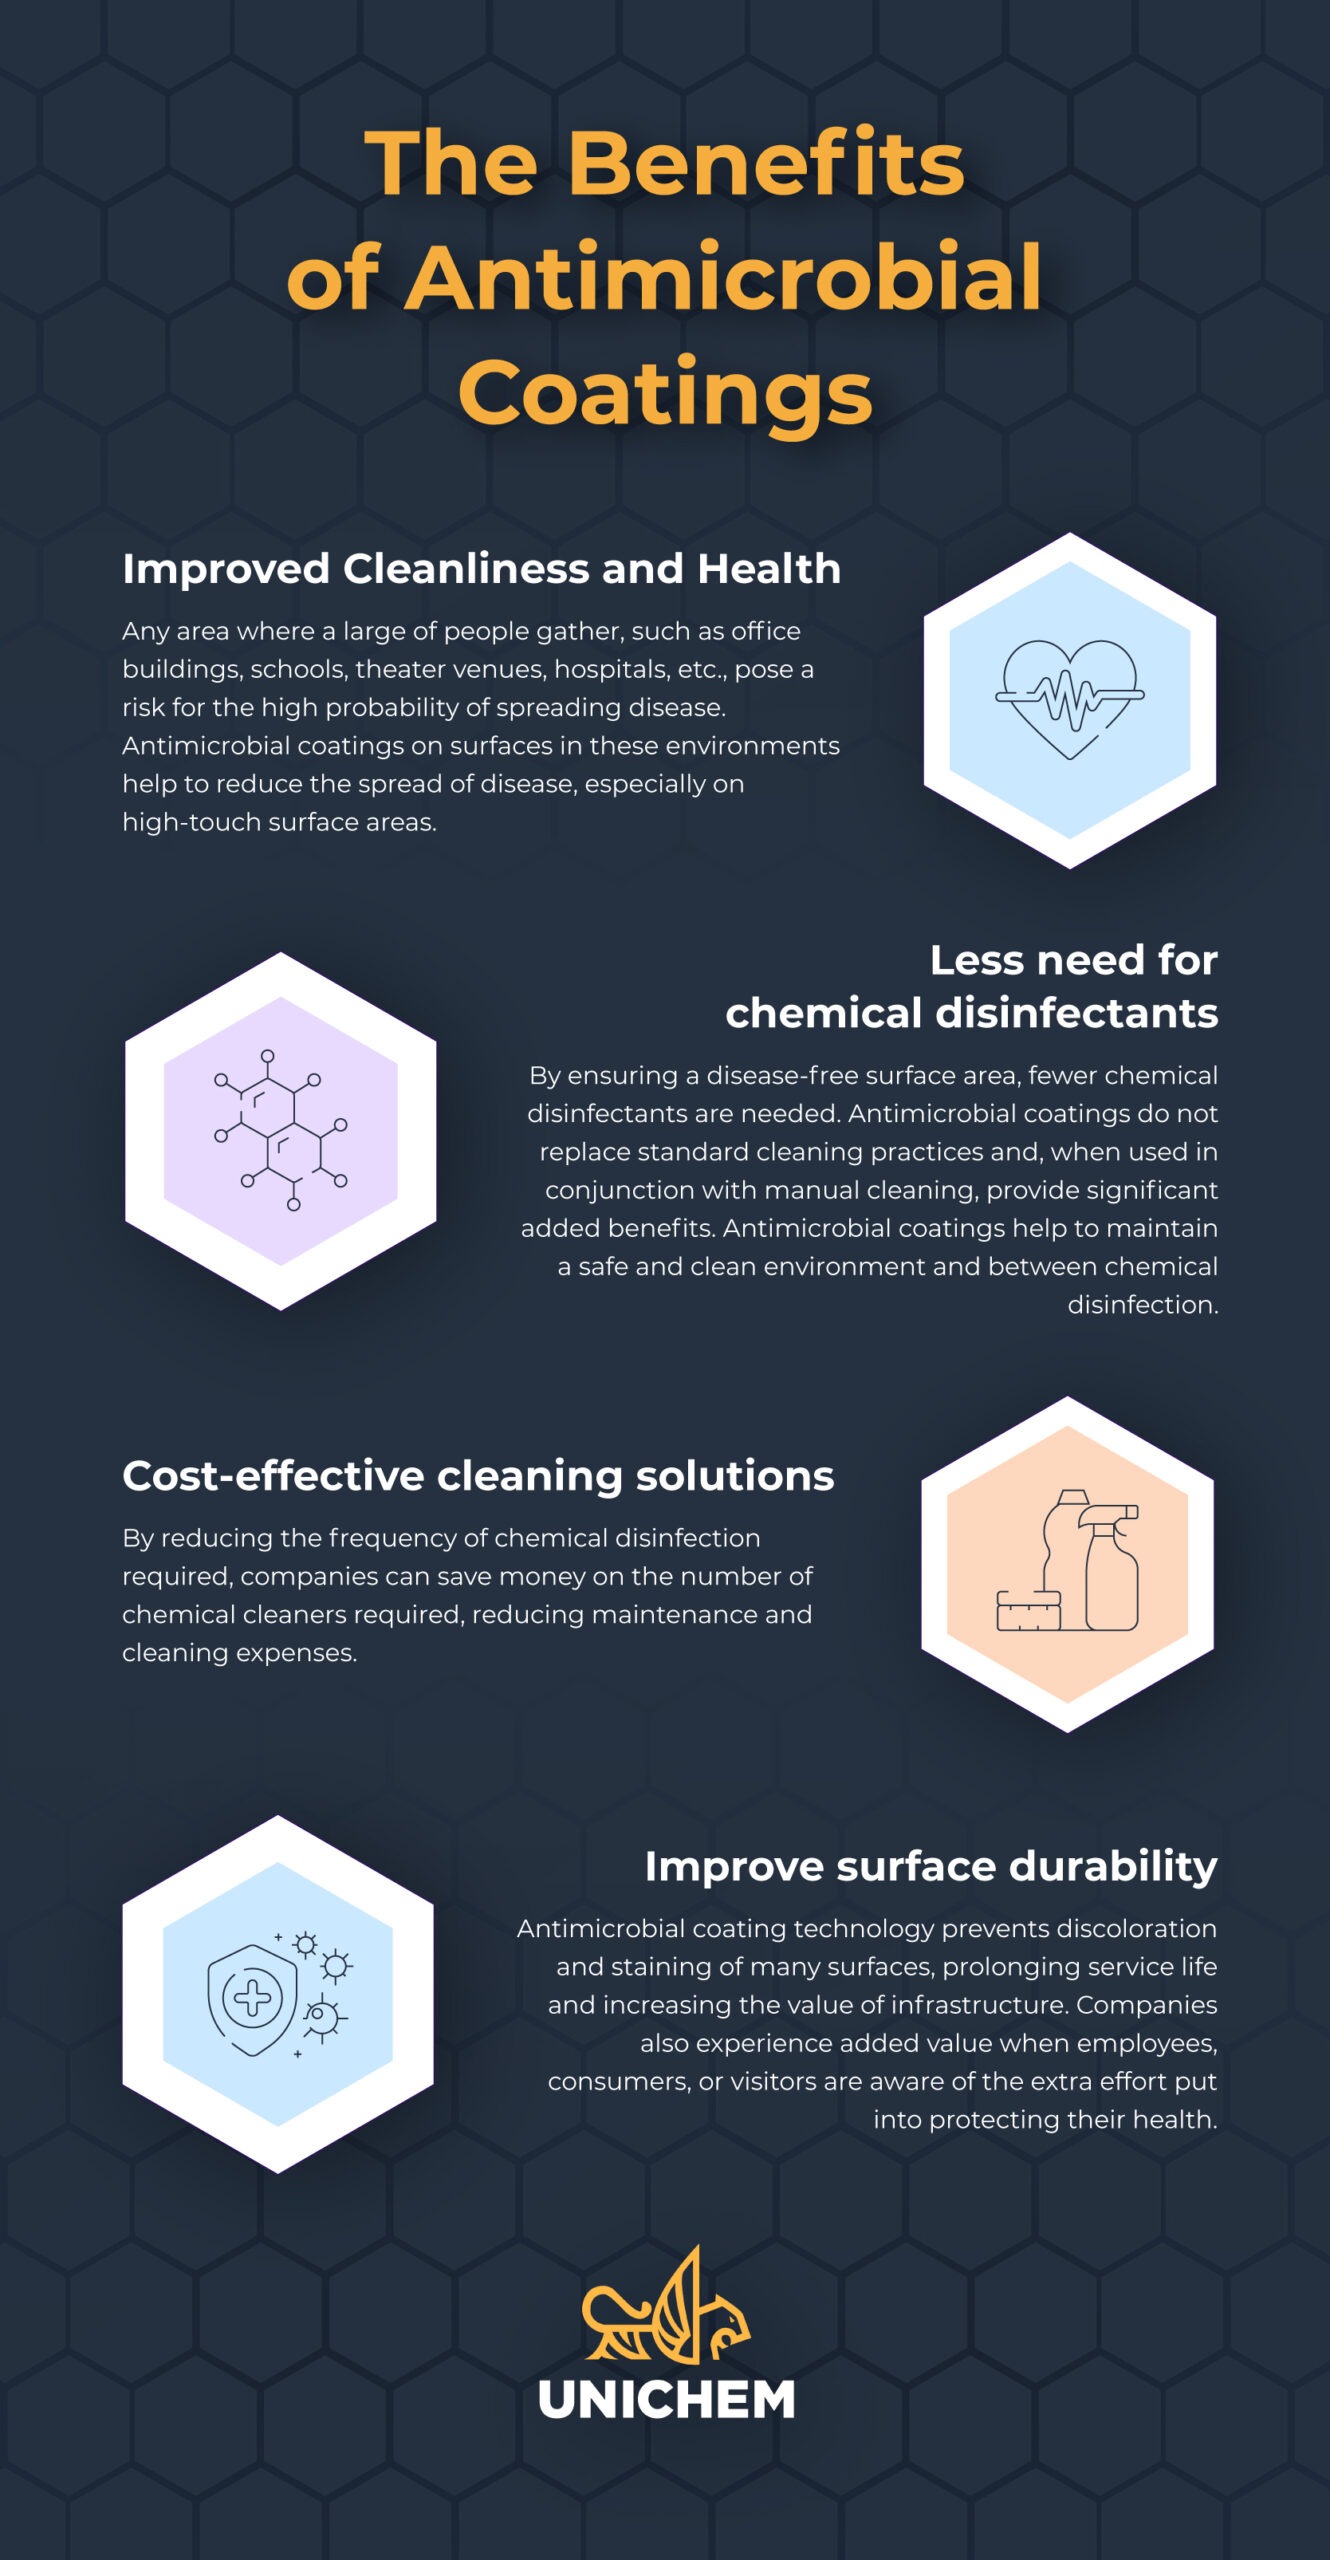 Benefits of antimicrobial coatings